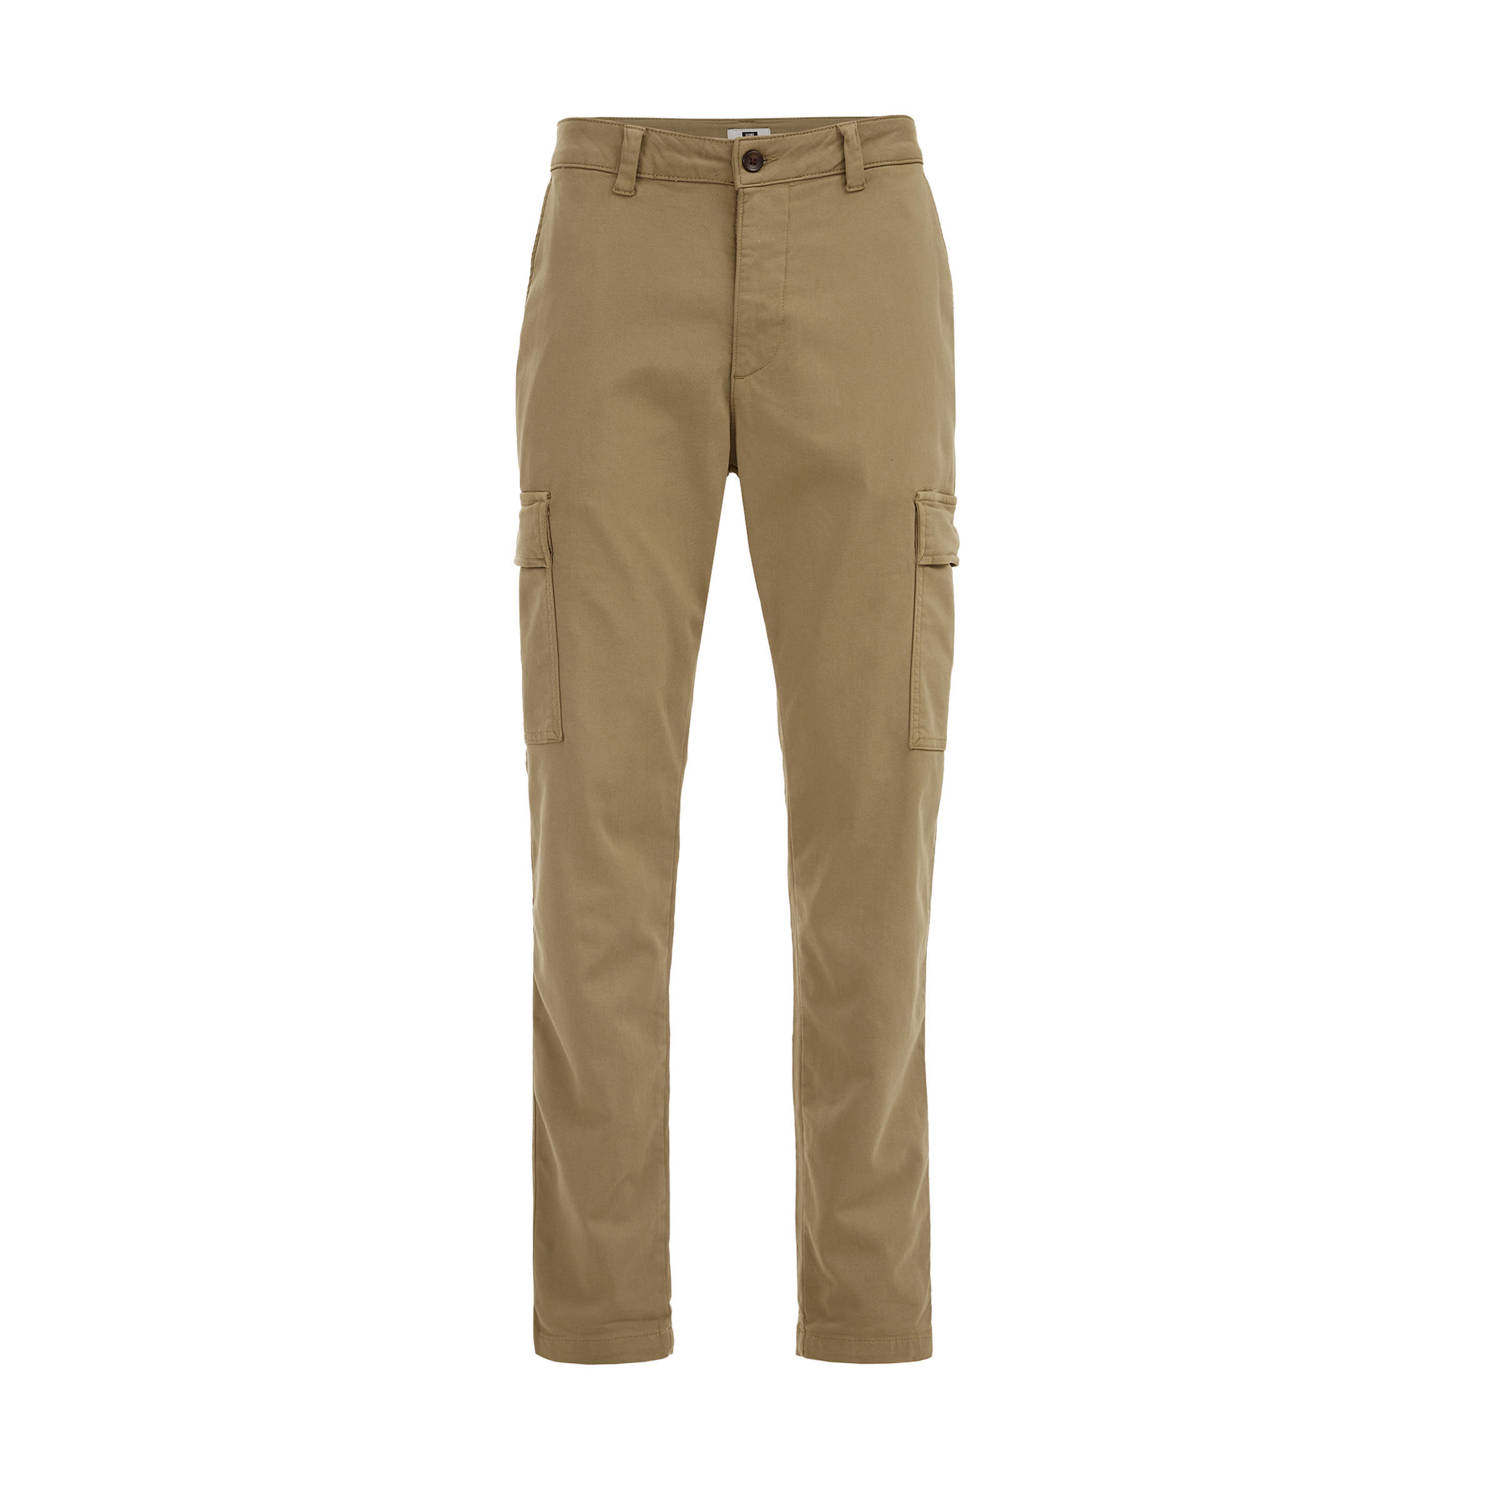 WE Fashion tapered fit cargo broek Base aloe